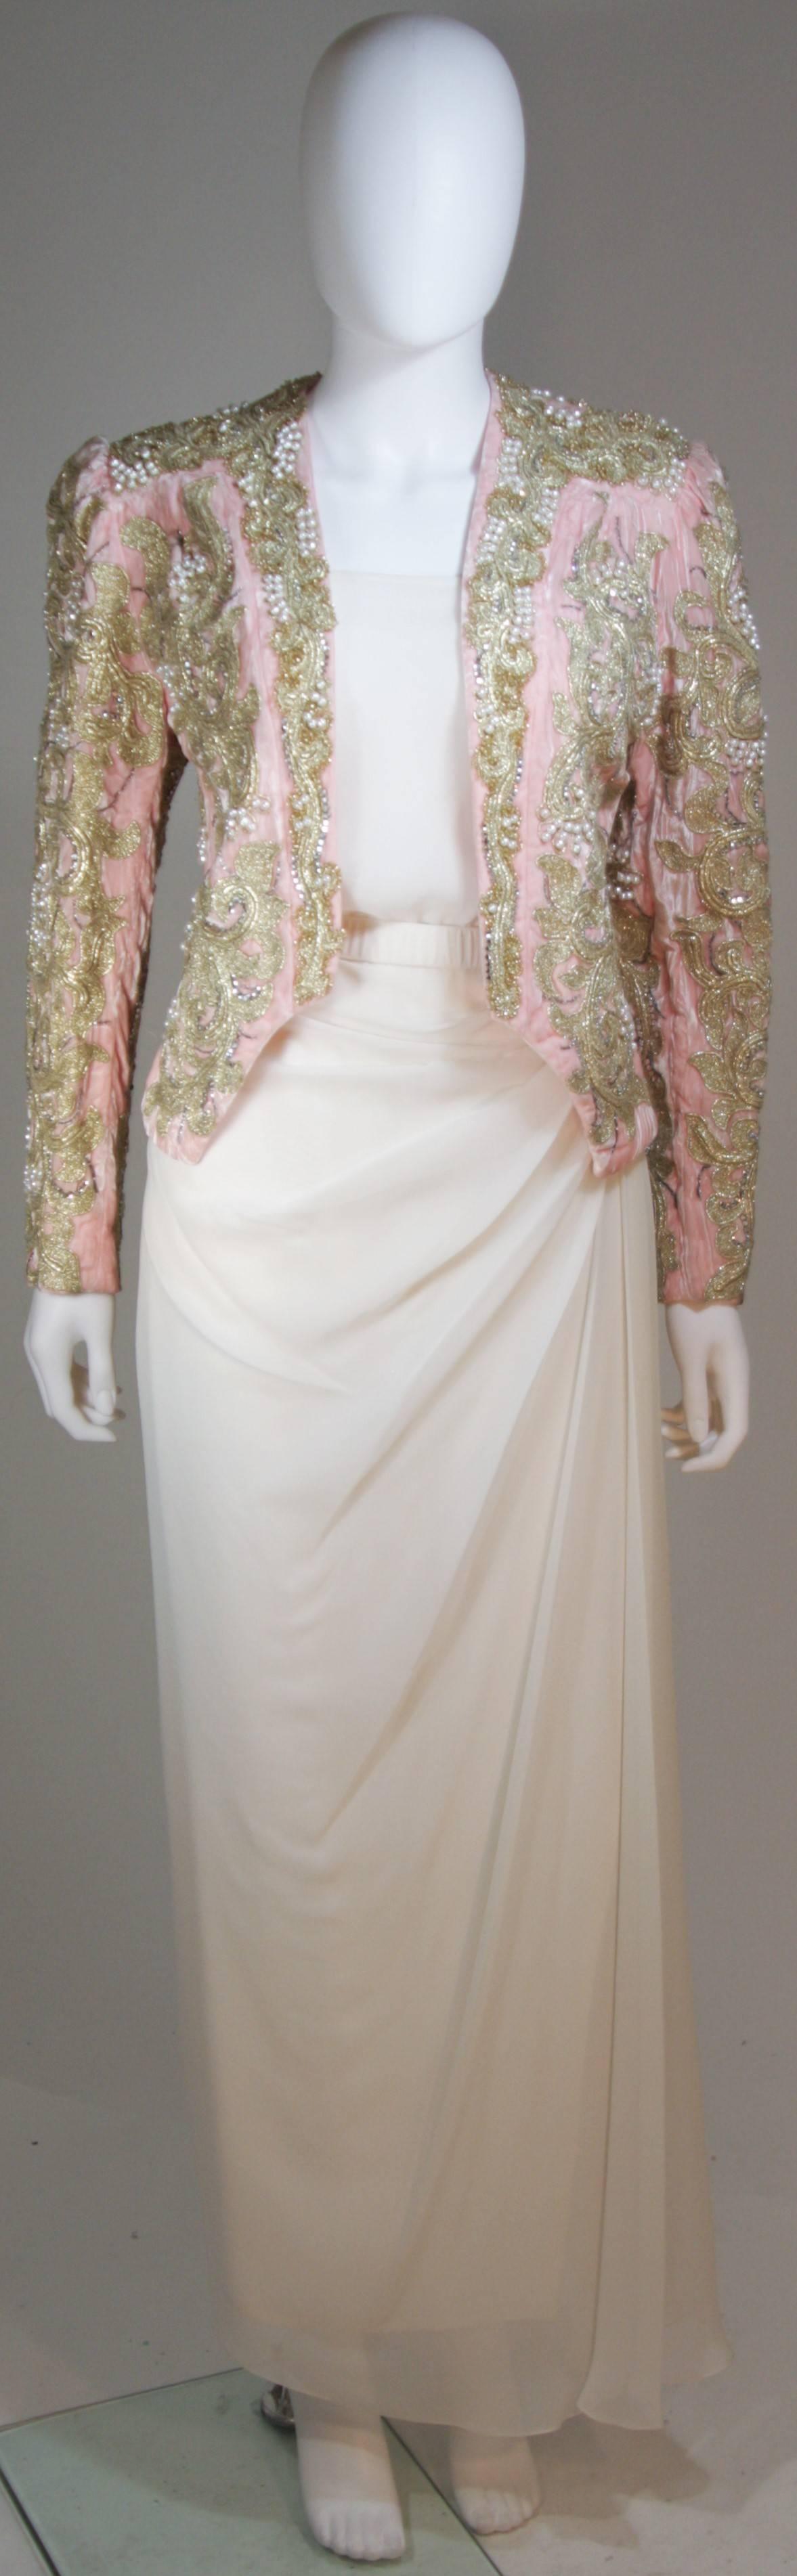  This Adolfo evening ensemble is composed of a pink embroidered velvet jacket with a ivory hued silk blouse and skirt. The jacket has an open front design, the blouse is pullover style, and the skirt has a zipper closure. In excellent great vintage